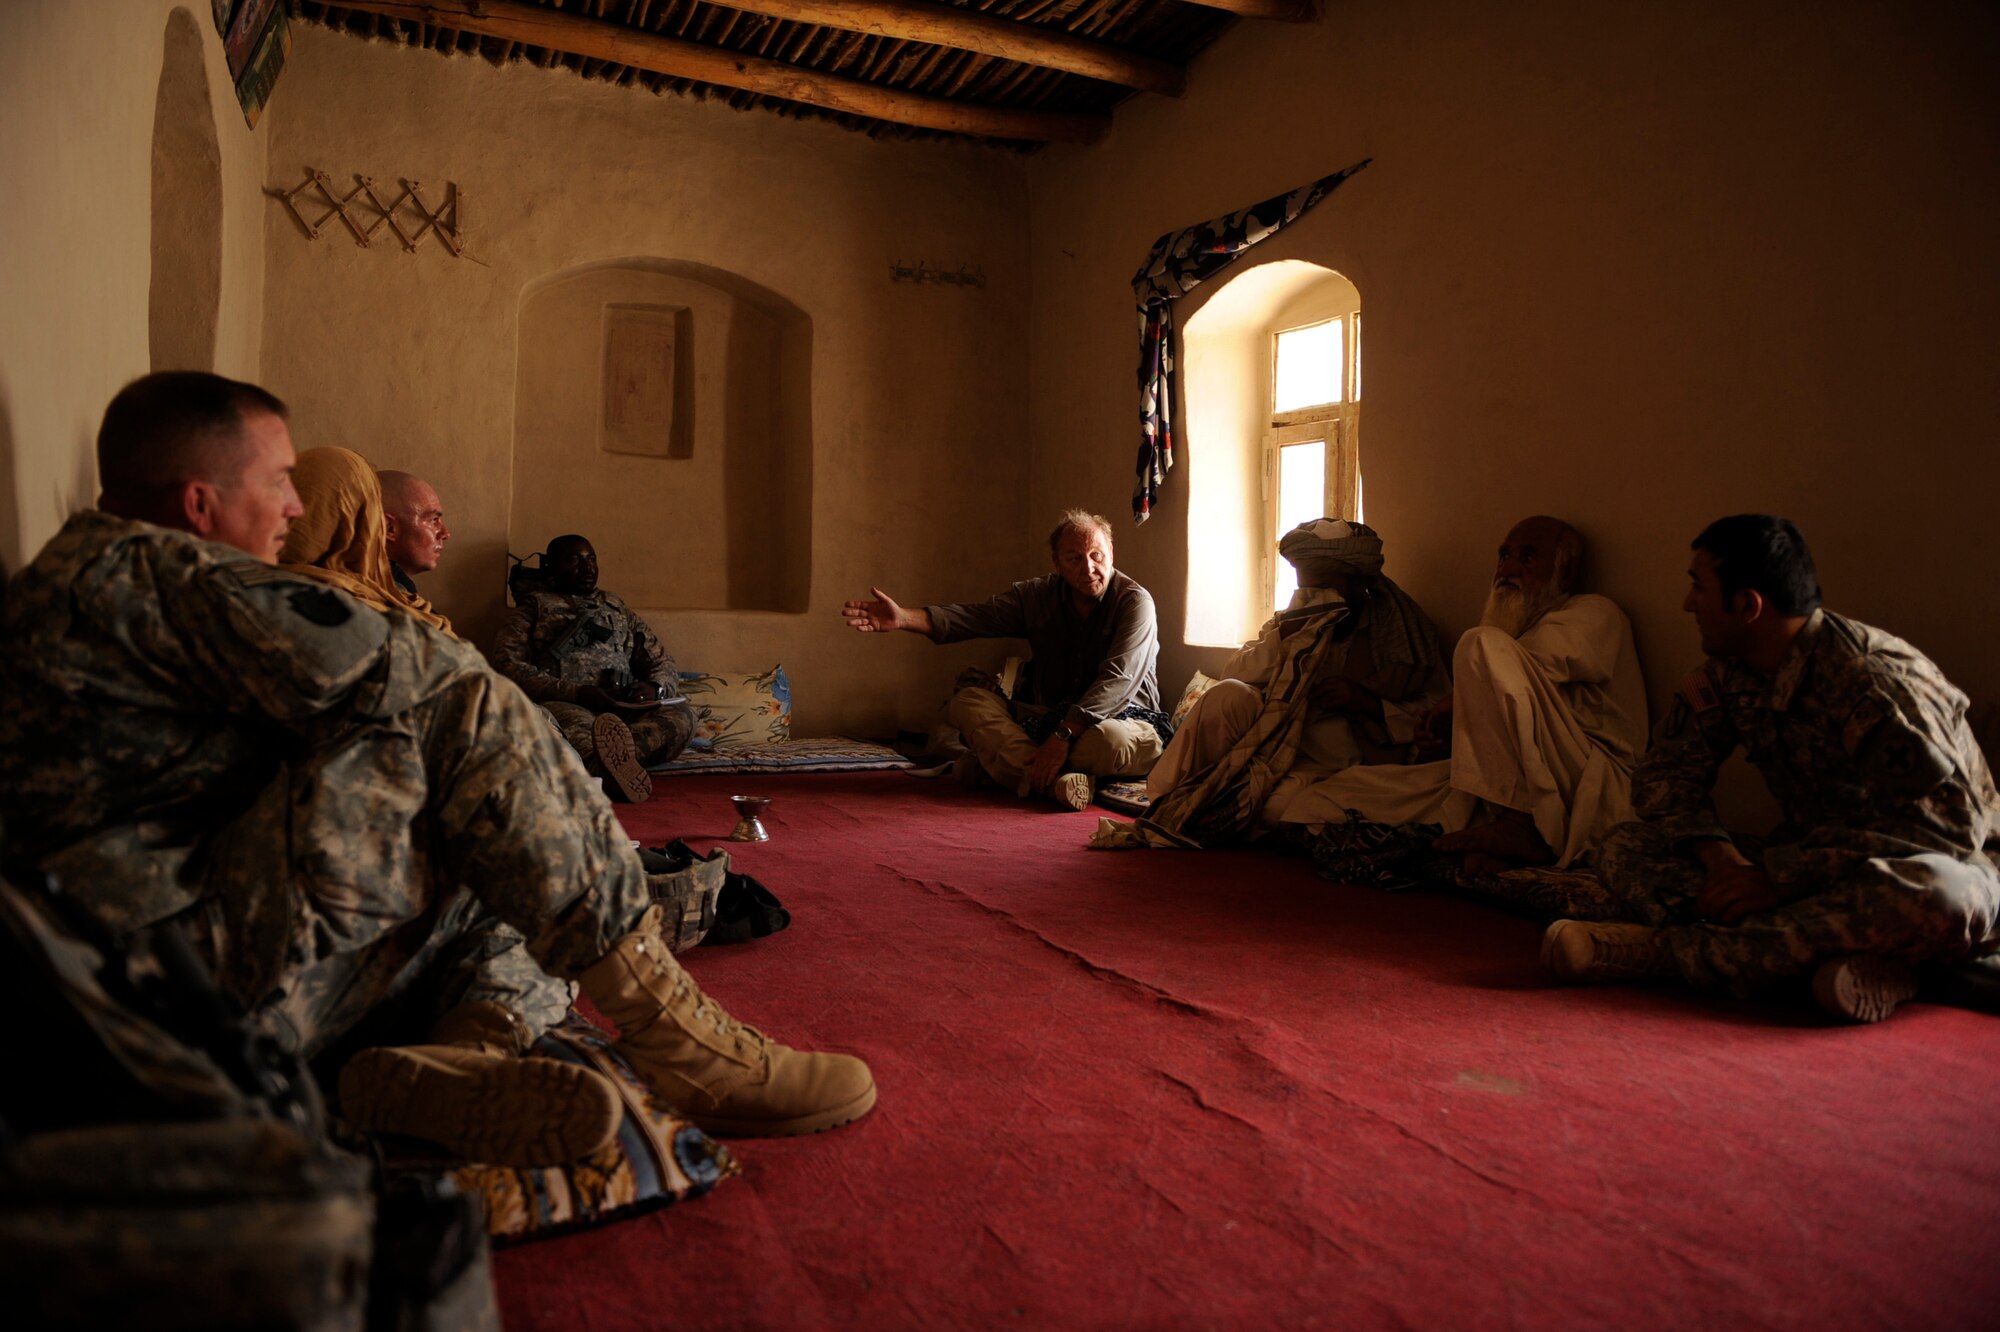 Dr. Jim Helton, U.S. Agency for International Development field program officer, working with Provincial Reconstruction Team Zabul, speaks with the Khalqdad Khan village elder during a meeting in the elder's home May 24, 2010, in Khaleqdad Khan, Afghanistan. ?As PRT Soldiers and Airmen funnel in and out they add to the reconstructive development and sustainability we build as a team," Dr. Helton said. "When we share the same vision and are well-integrated we are able to serve the people of Zabul as on single-minded unit focused on serving the Afghan people here.? (U.S. Air Force photo/Staff Sgt. Manuel J. Martinez/released) 